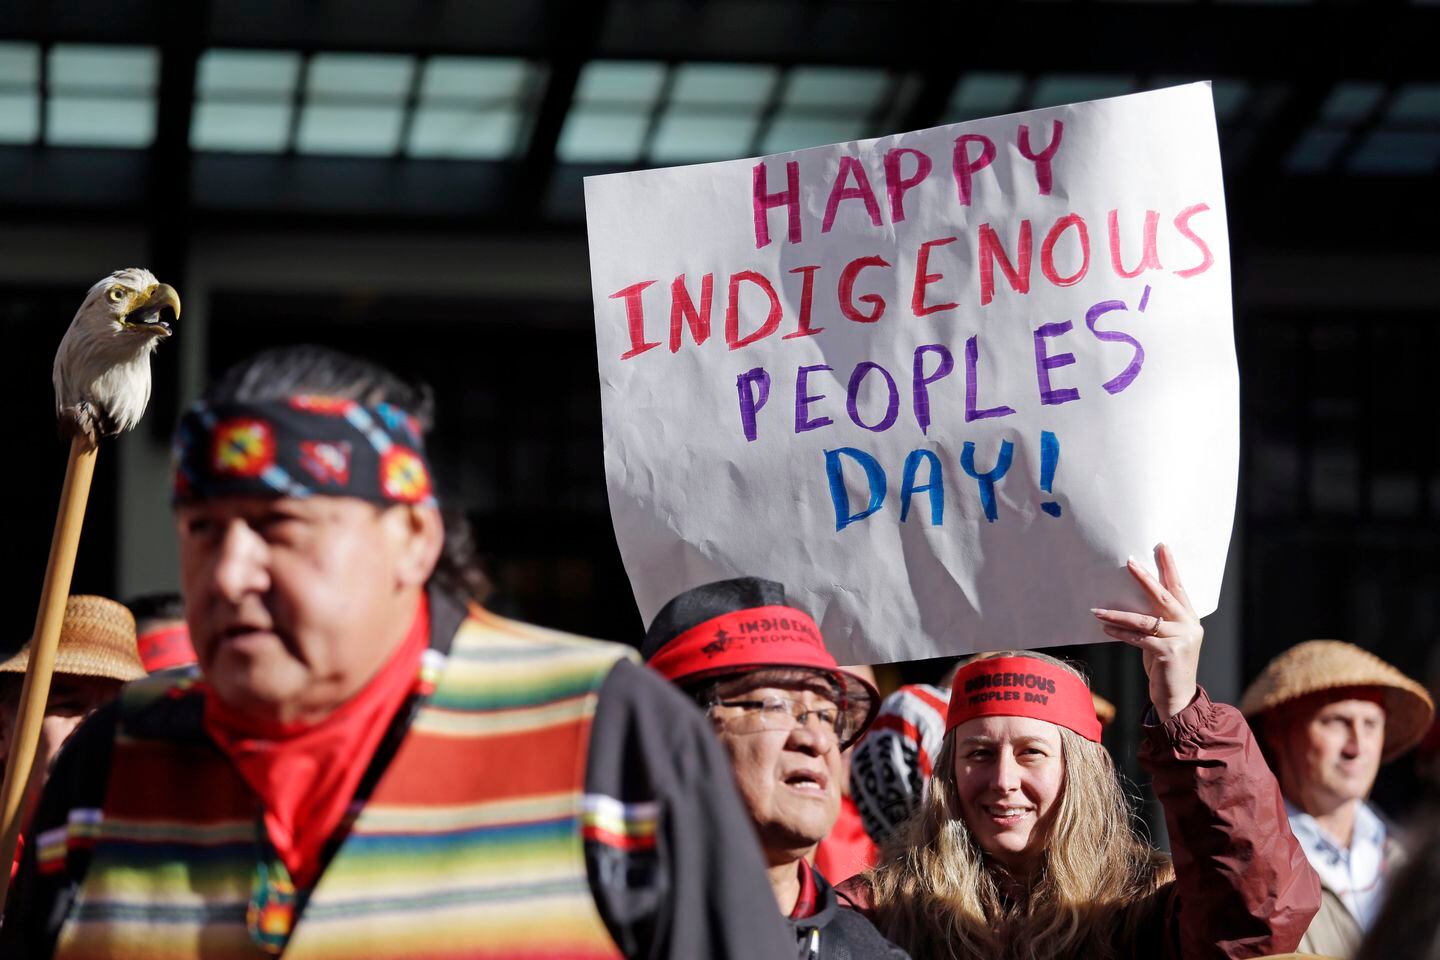 Seattle celebrates its second official Indigenous Peoples' Day